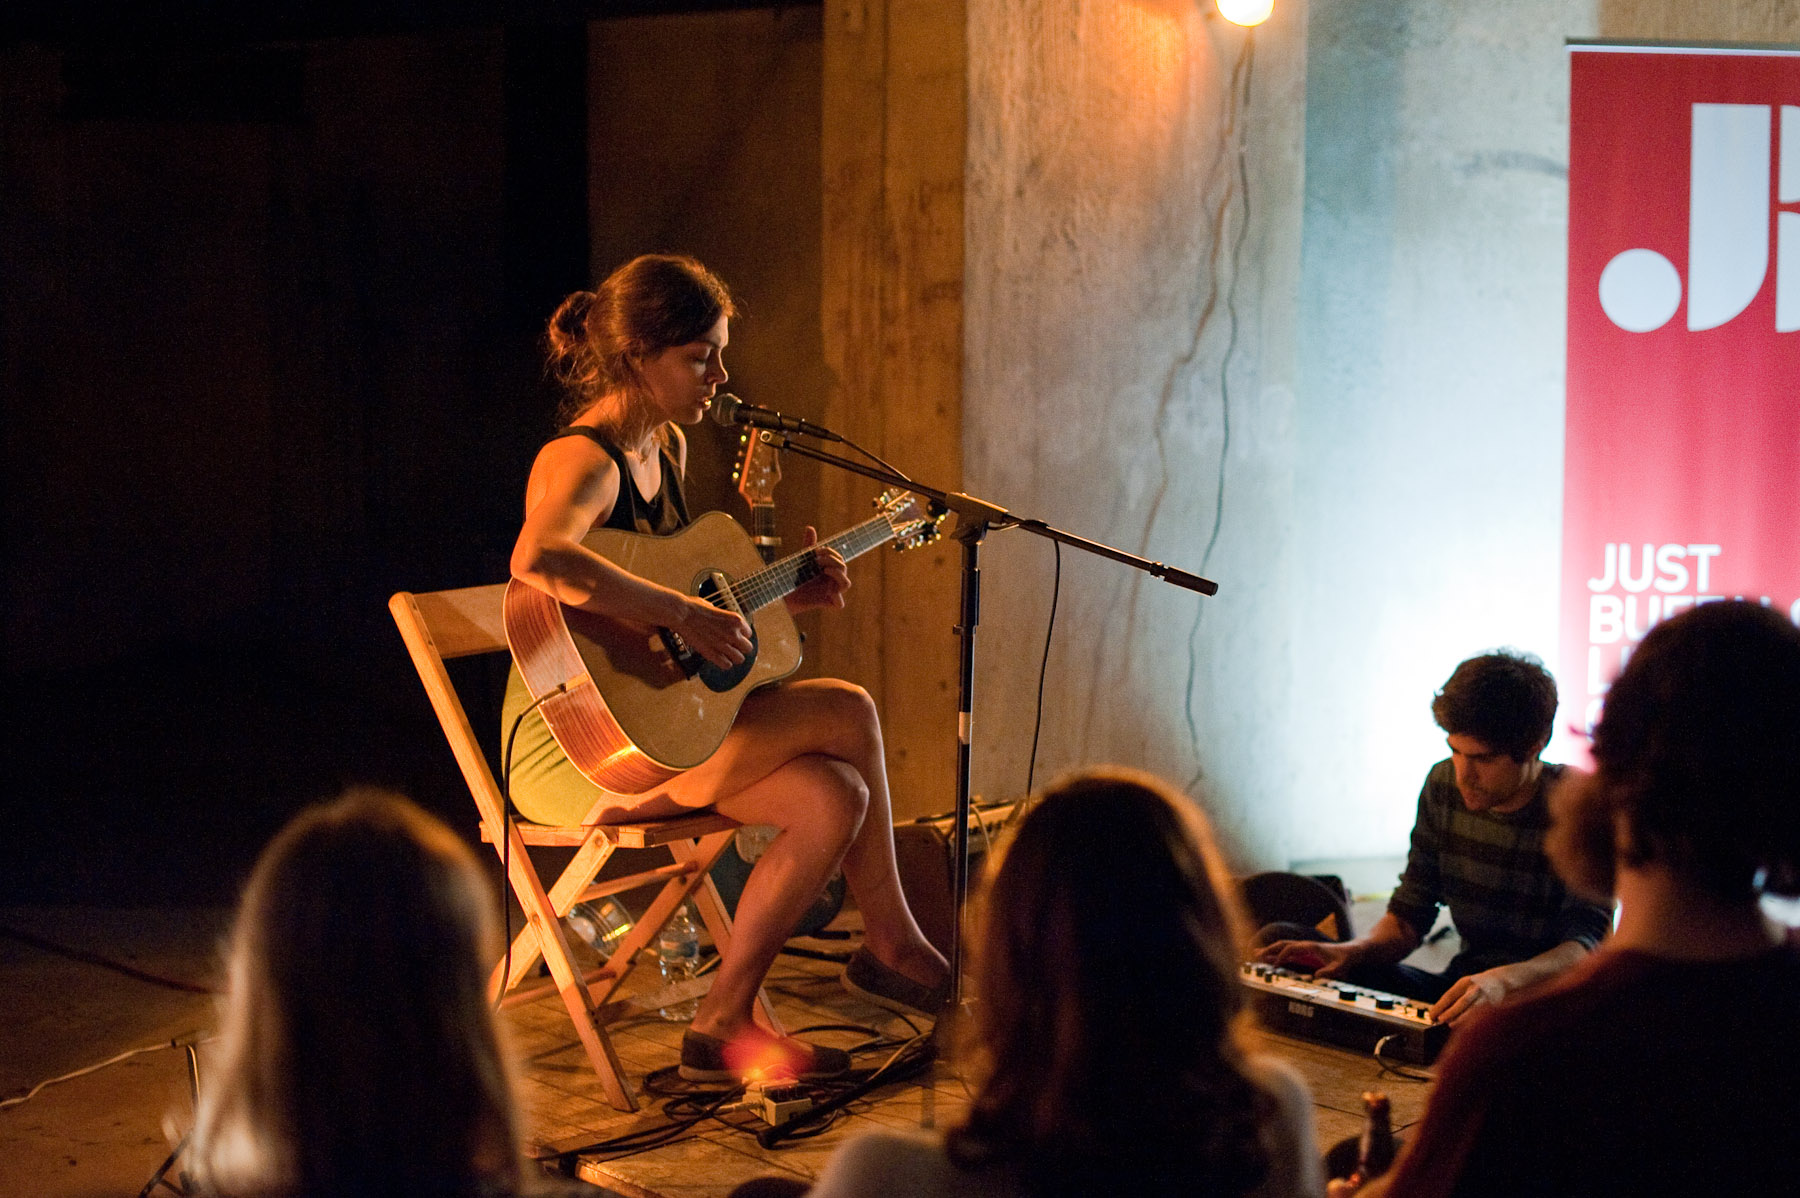 Julie Bryne performing at the Silo City Reading Series on August 29, 2015